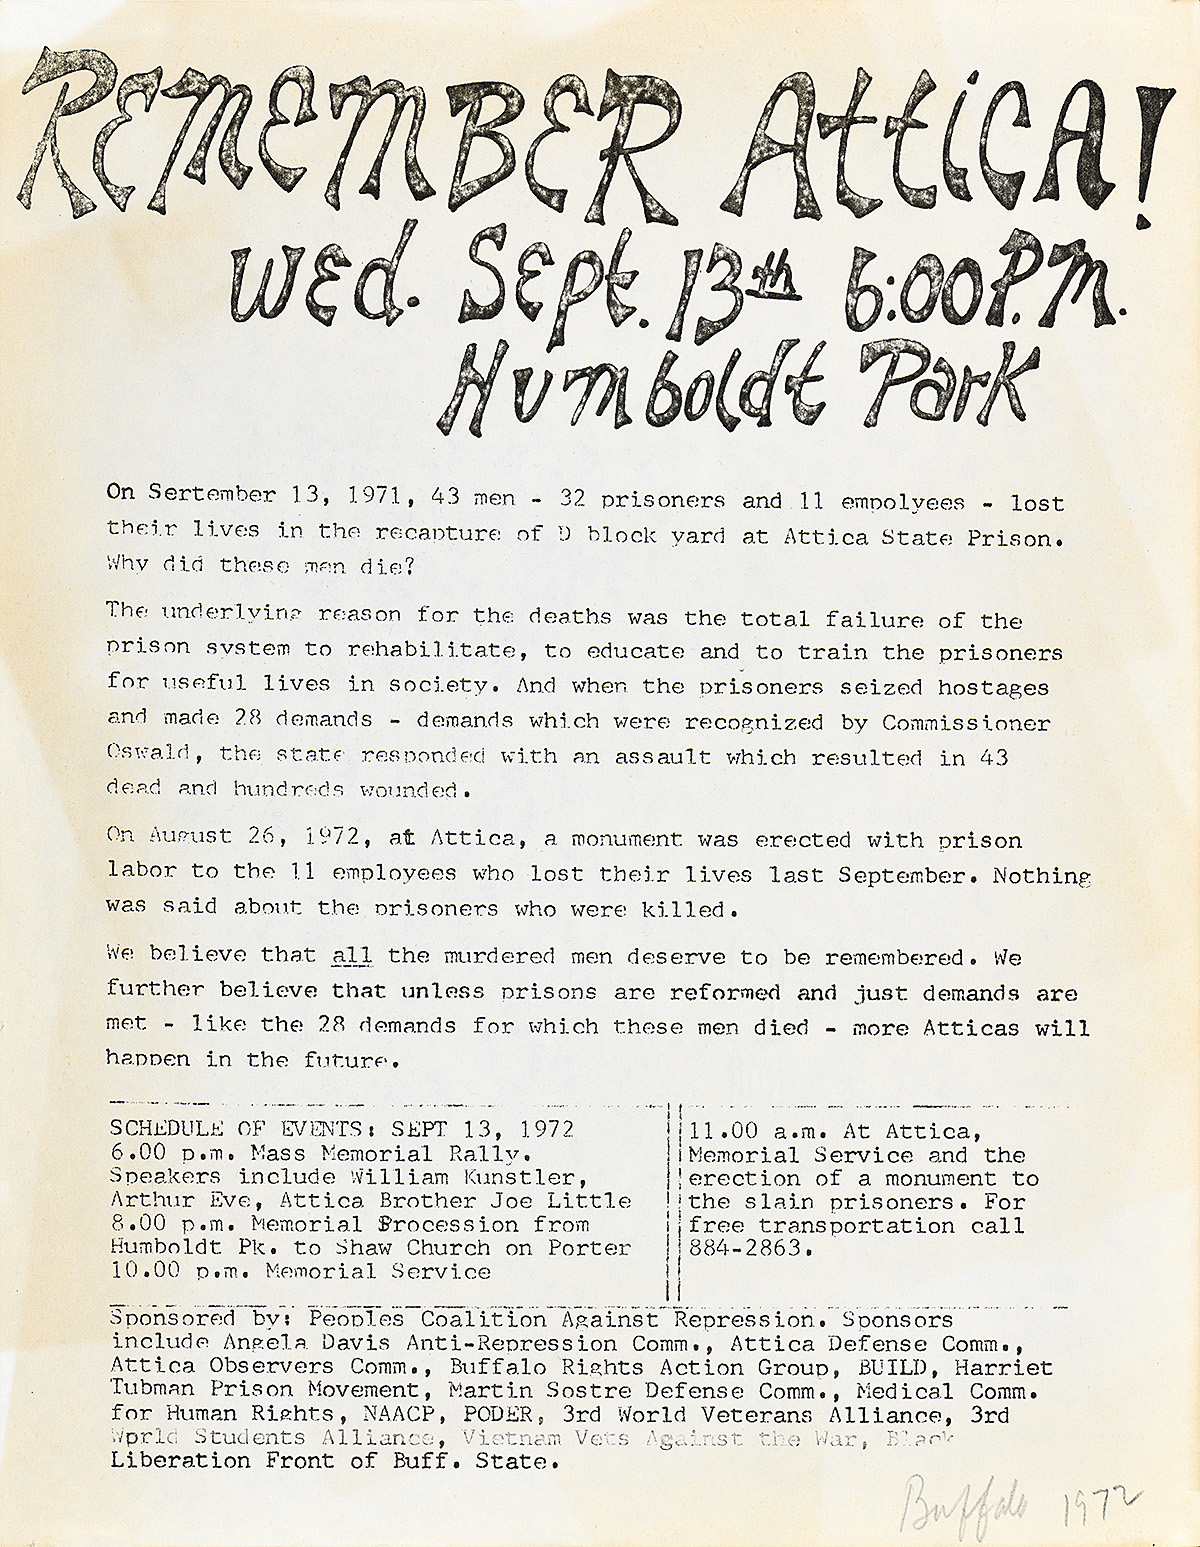 A handbill with text stating 'Remember Attica' urging people to attend a memorial in Humboldt Park.